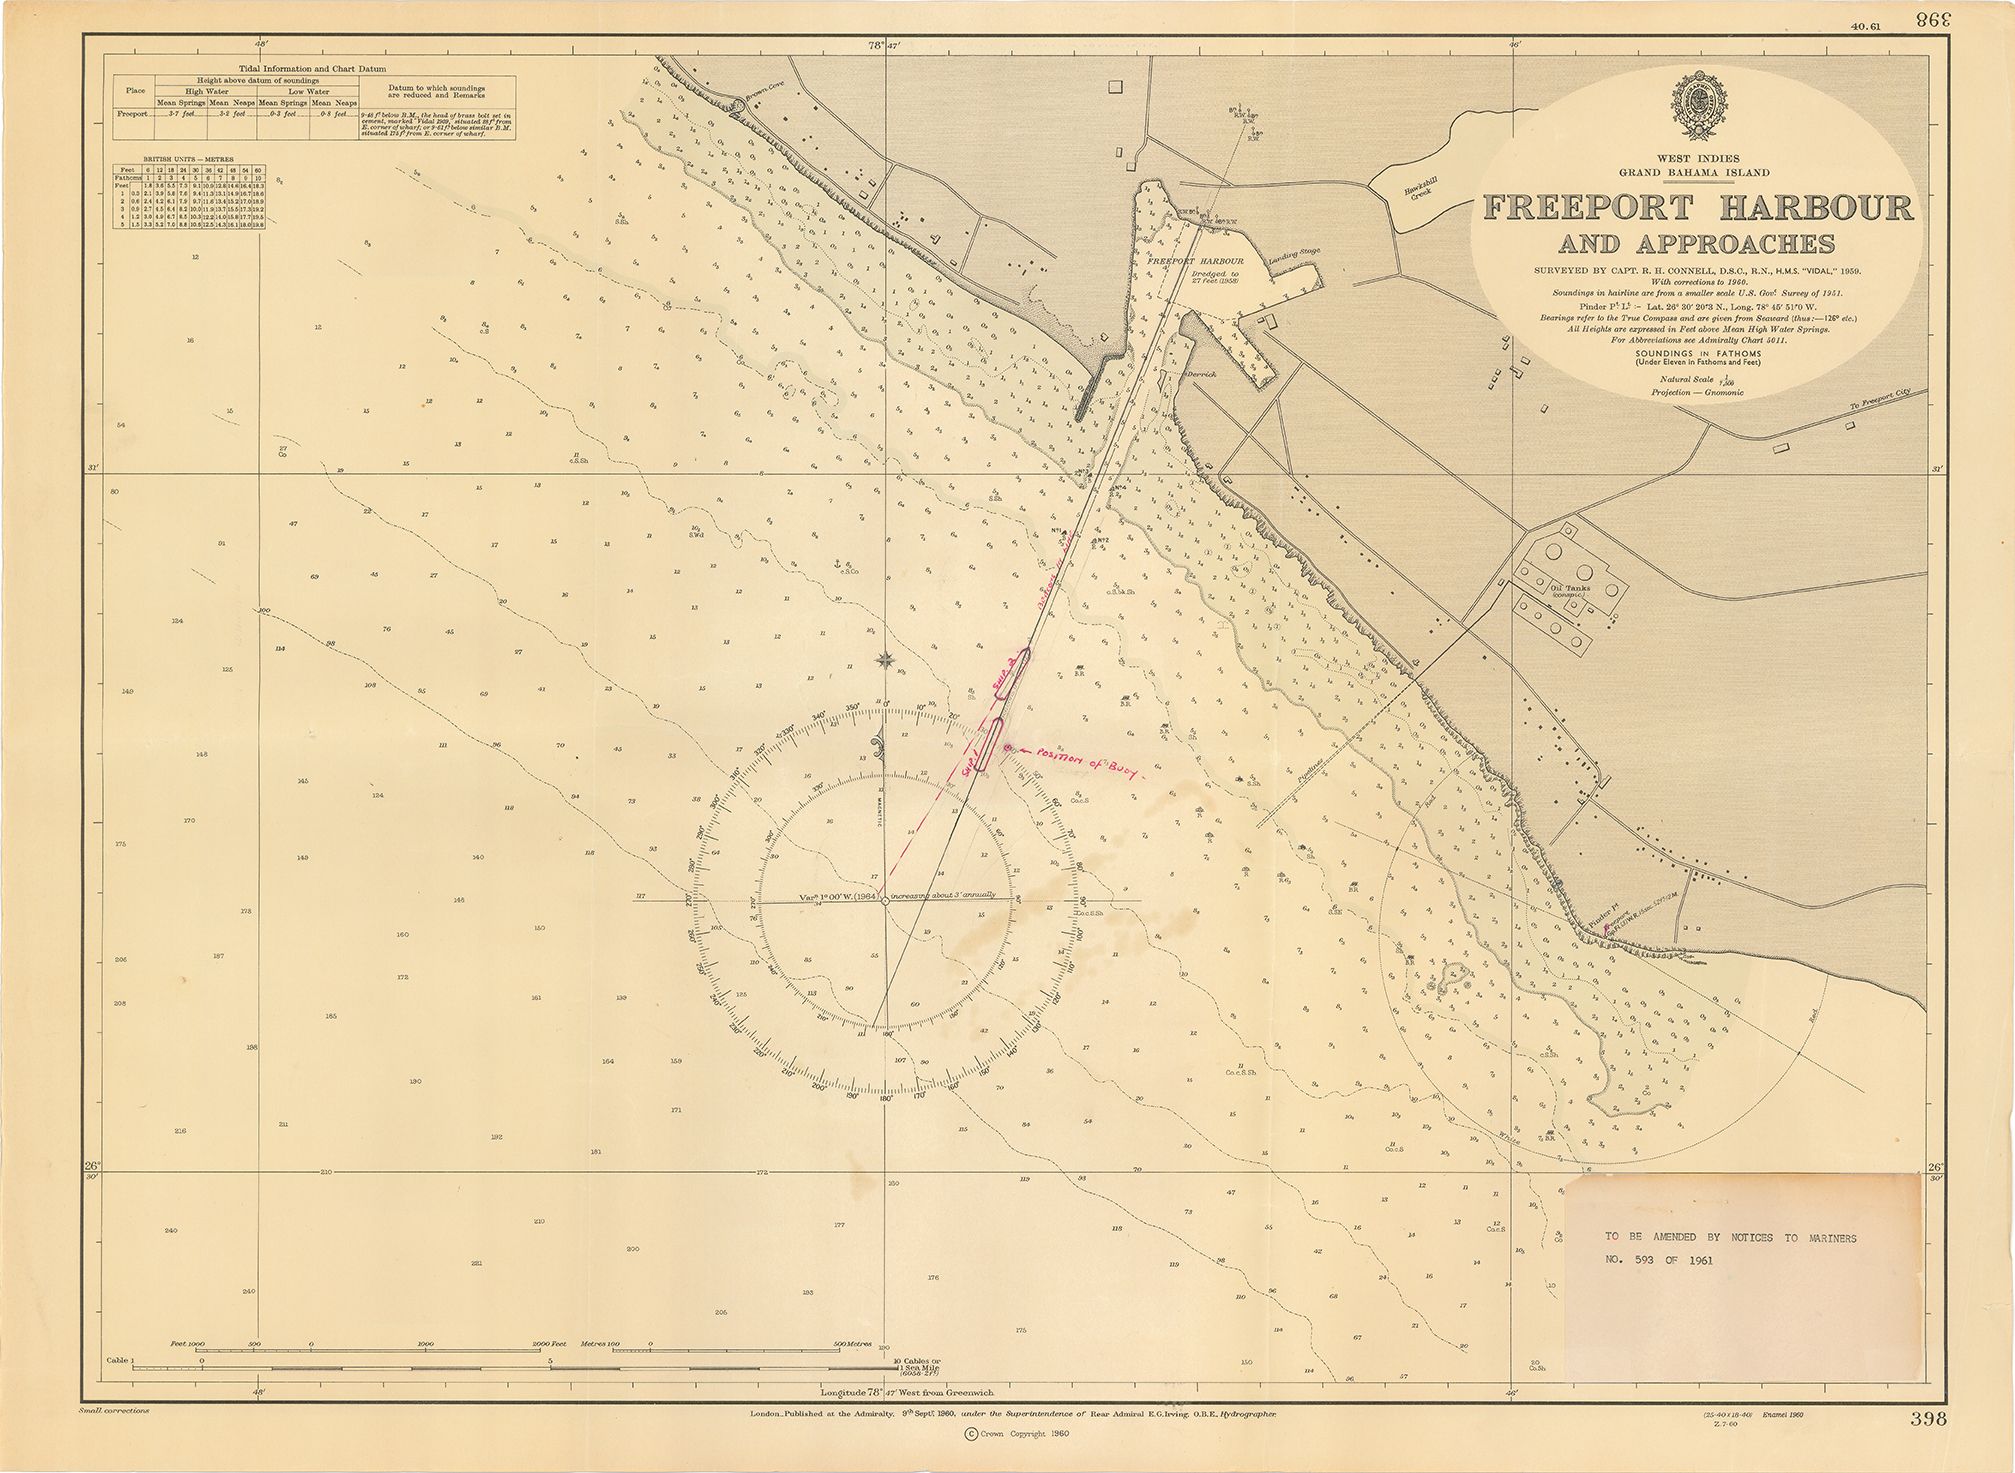 1961 Chart - Freeport Harbour and Approaches